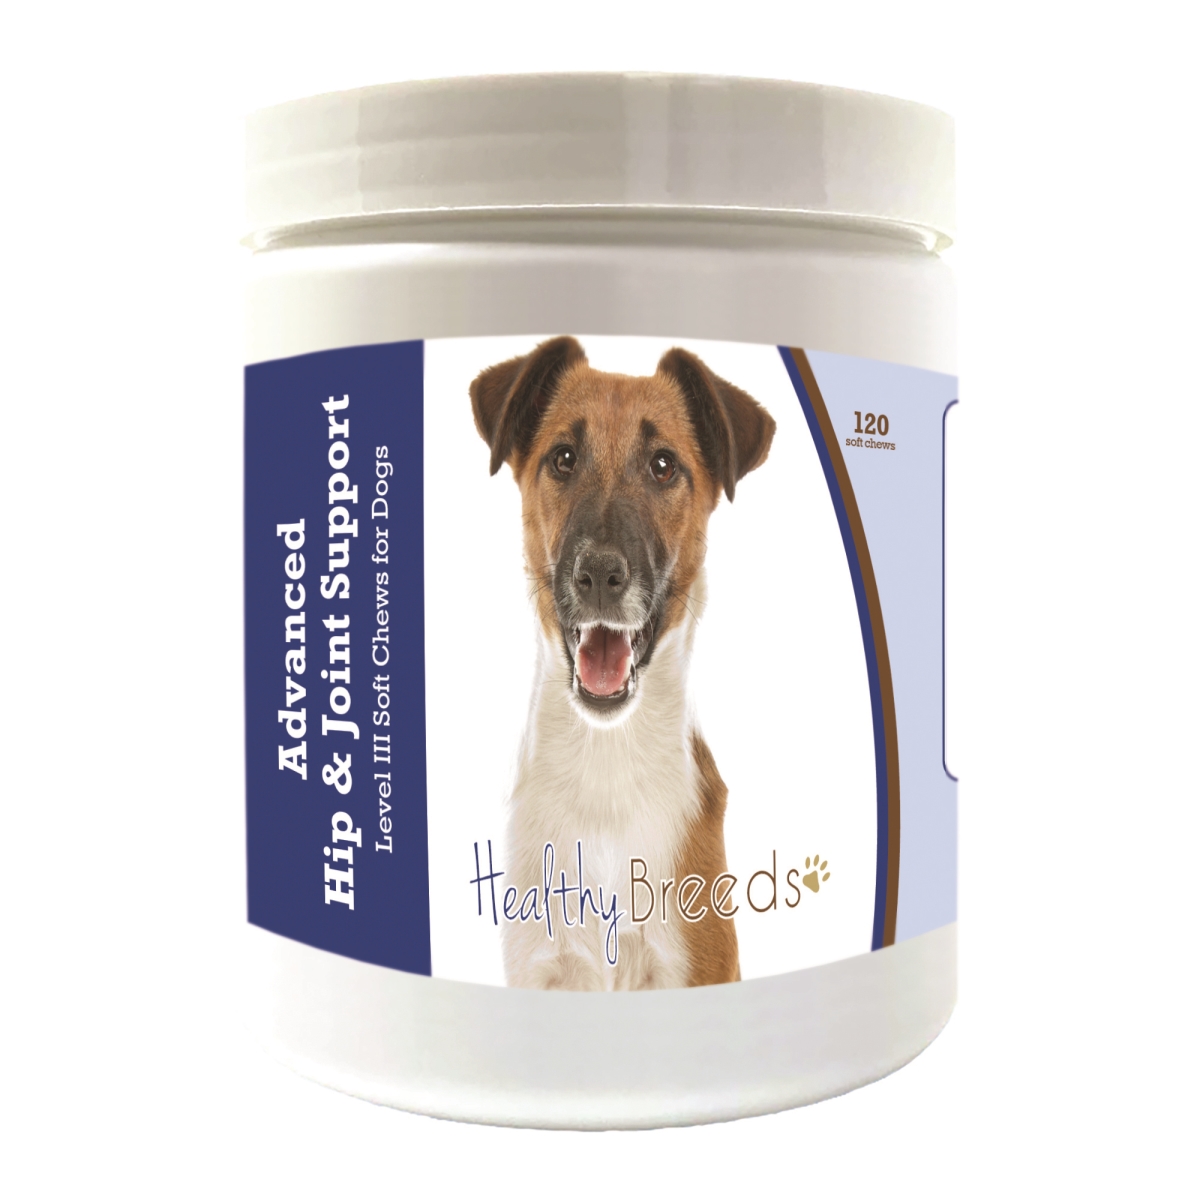 Picture of Healthy Breeds 192959899207 Smooth Fox Terrier Advanced Hip & Joint Support Level III Soft Chews for Dogs